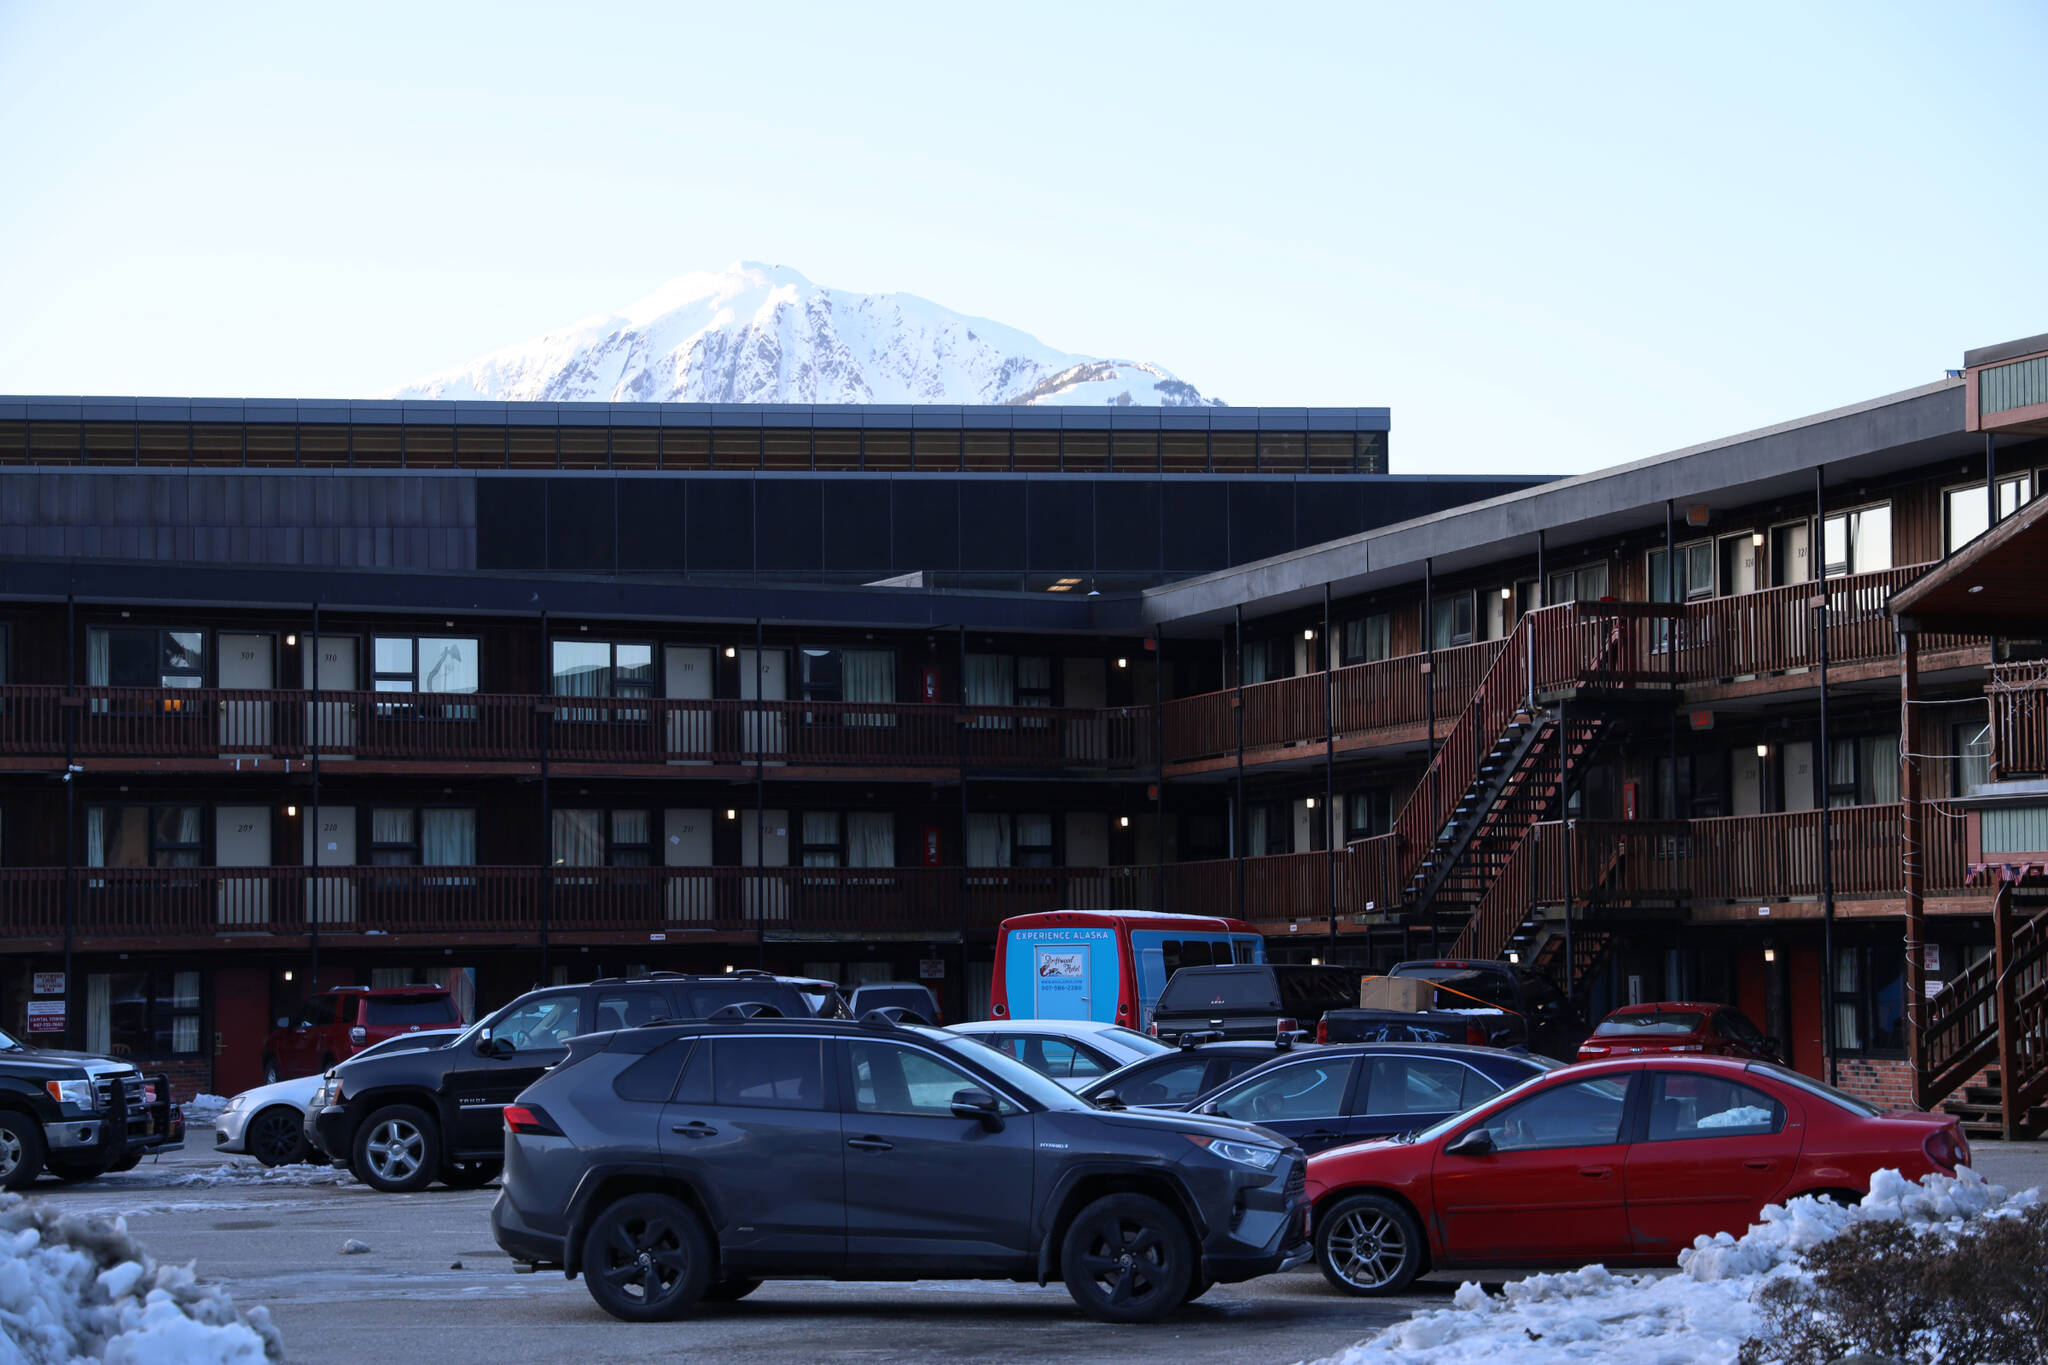 Clarise Larson / Juneau Empire 
Cars fill the parking lot outside of Driftwood Lodge in downtown Juneau Monday morning. The Central Council of the Tlingit and Haida Indian Tribes of Alaska recently announced it’s purchase of the site.